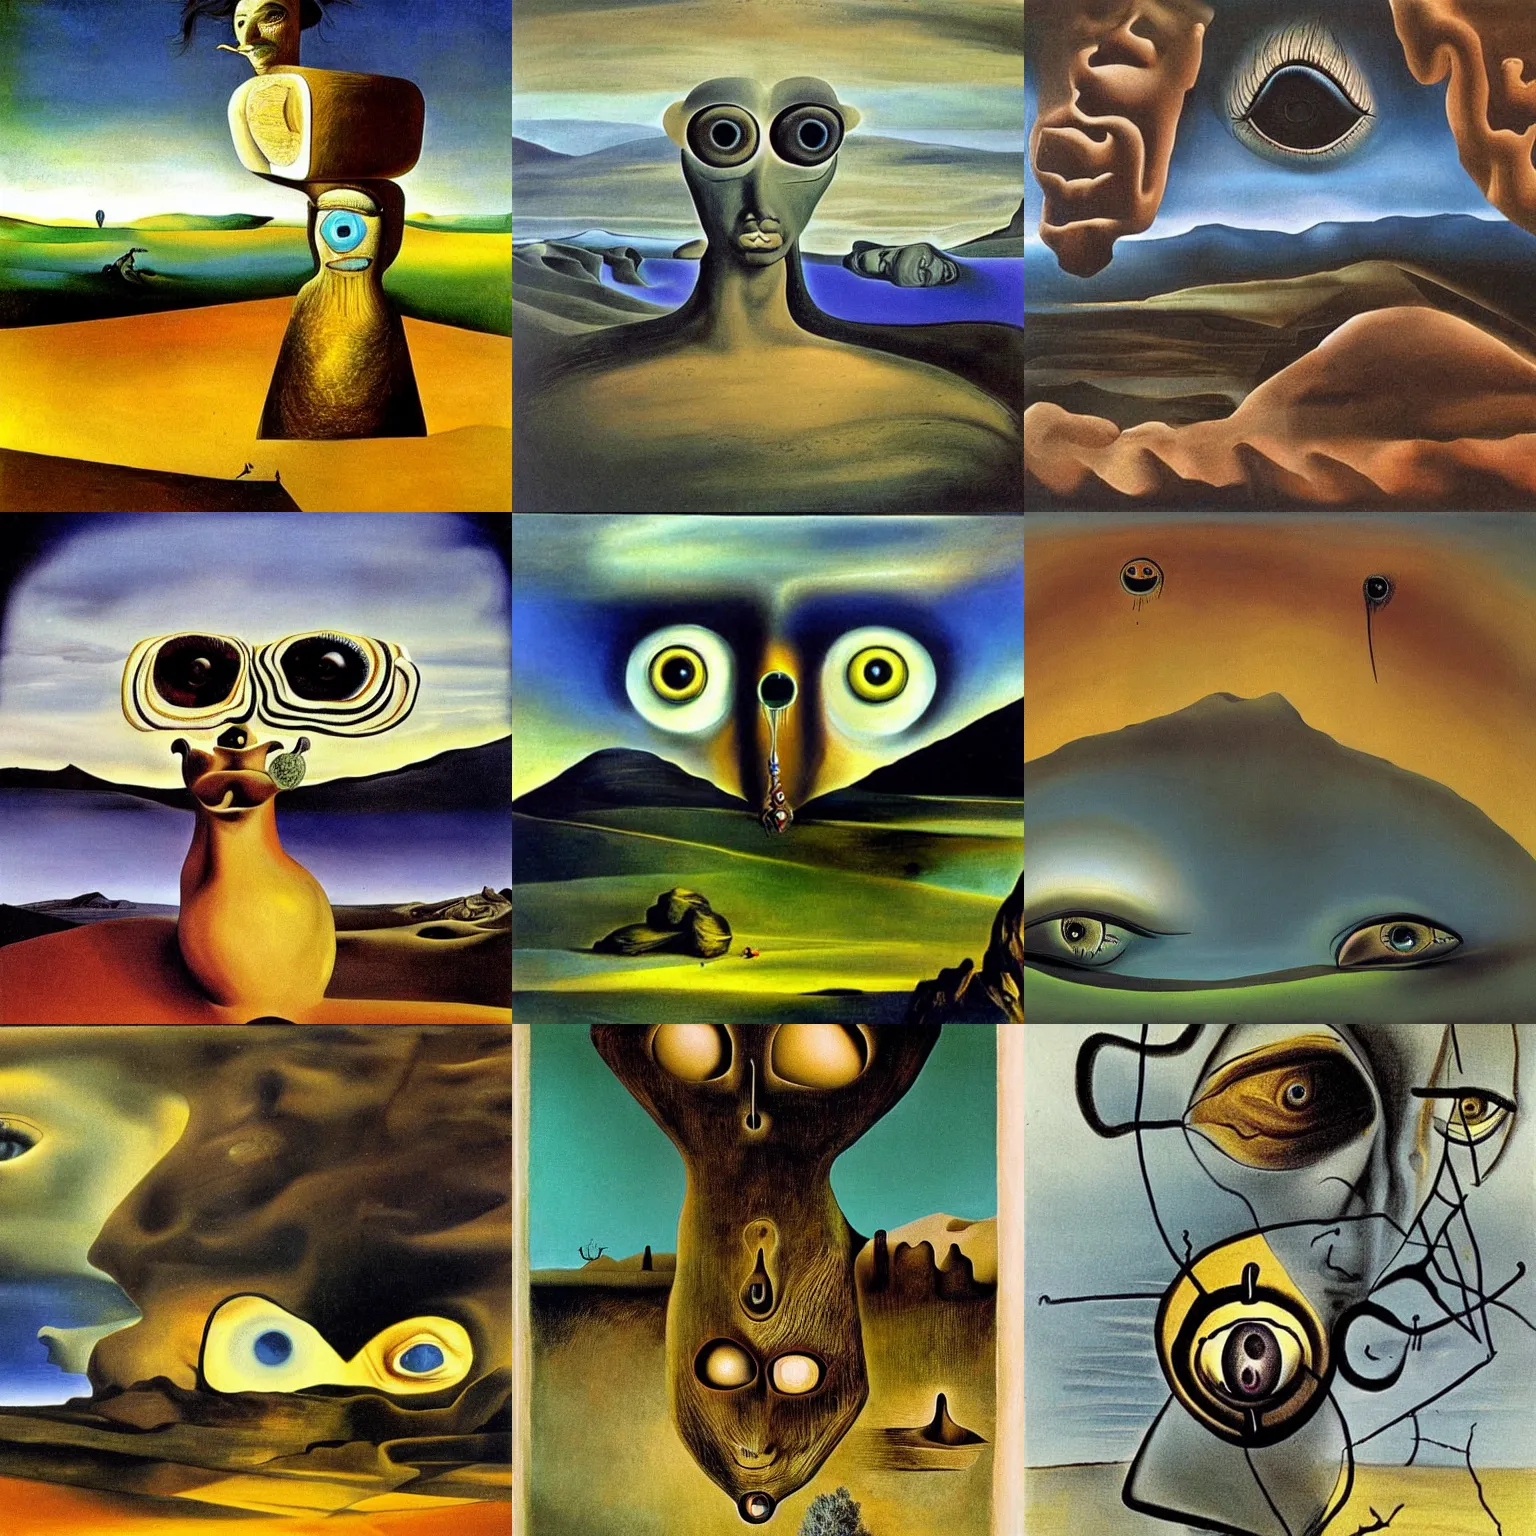 Prompt: The hills have eyes by Salvador Dali